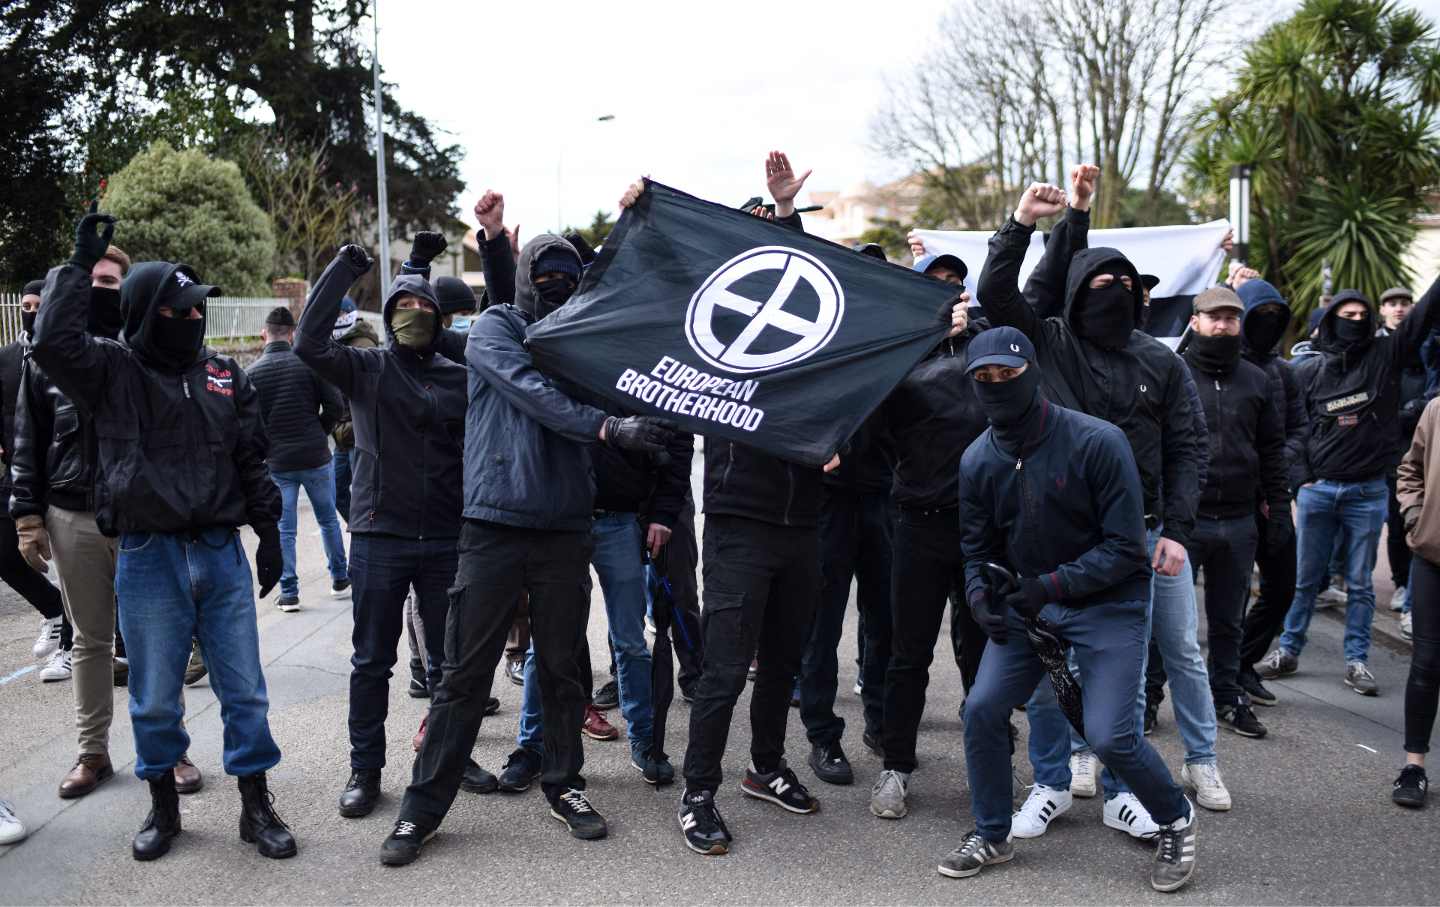 Far right 'European Brotherhood' protesters hold a banner as they pose at a rally in Saint-Brevin-les Pins, western France on February 25, 2023, held to protest against the establishment of a reception center for migrants.